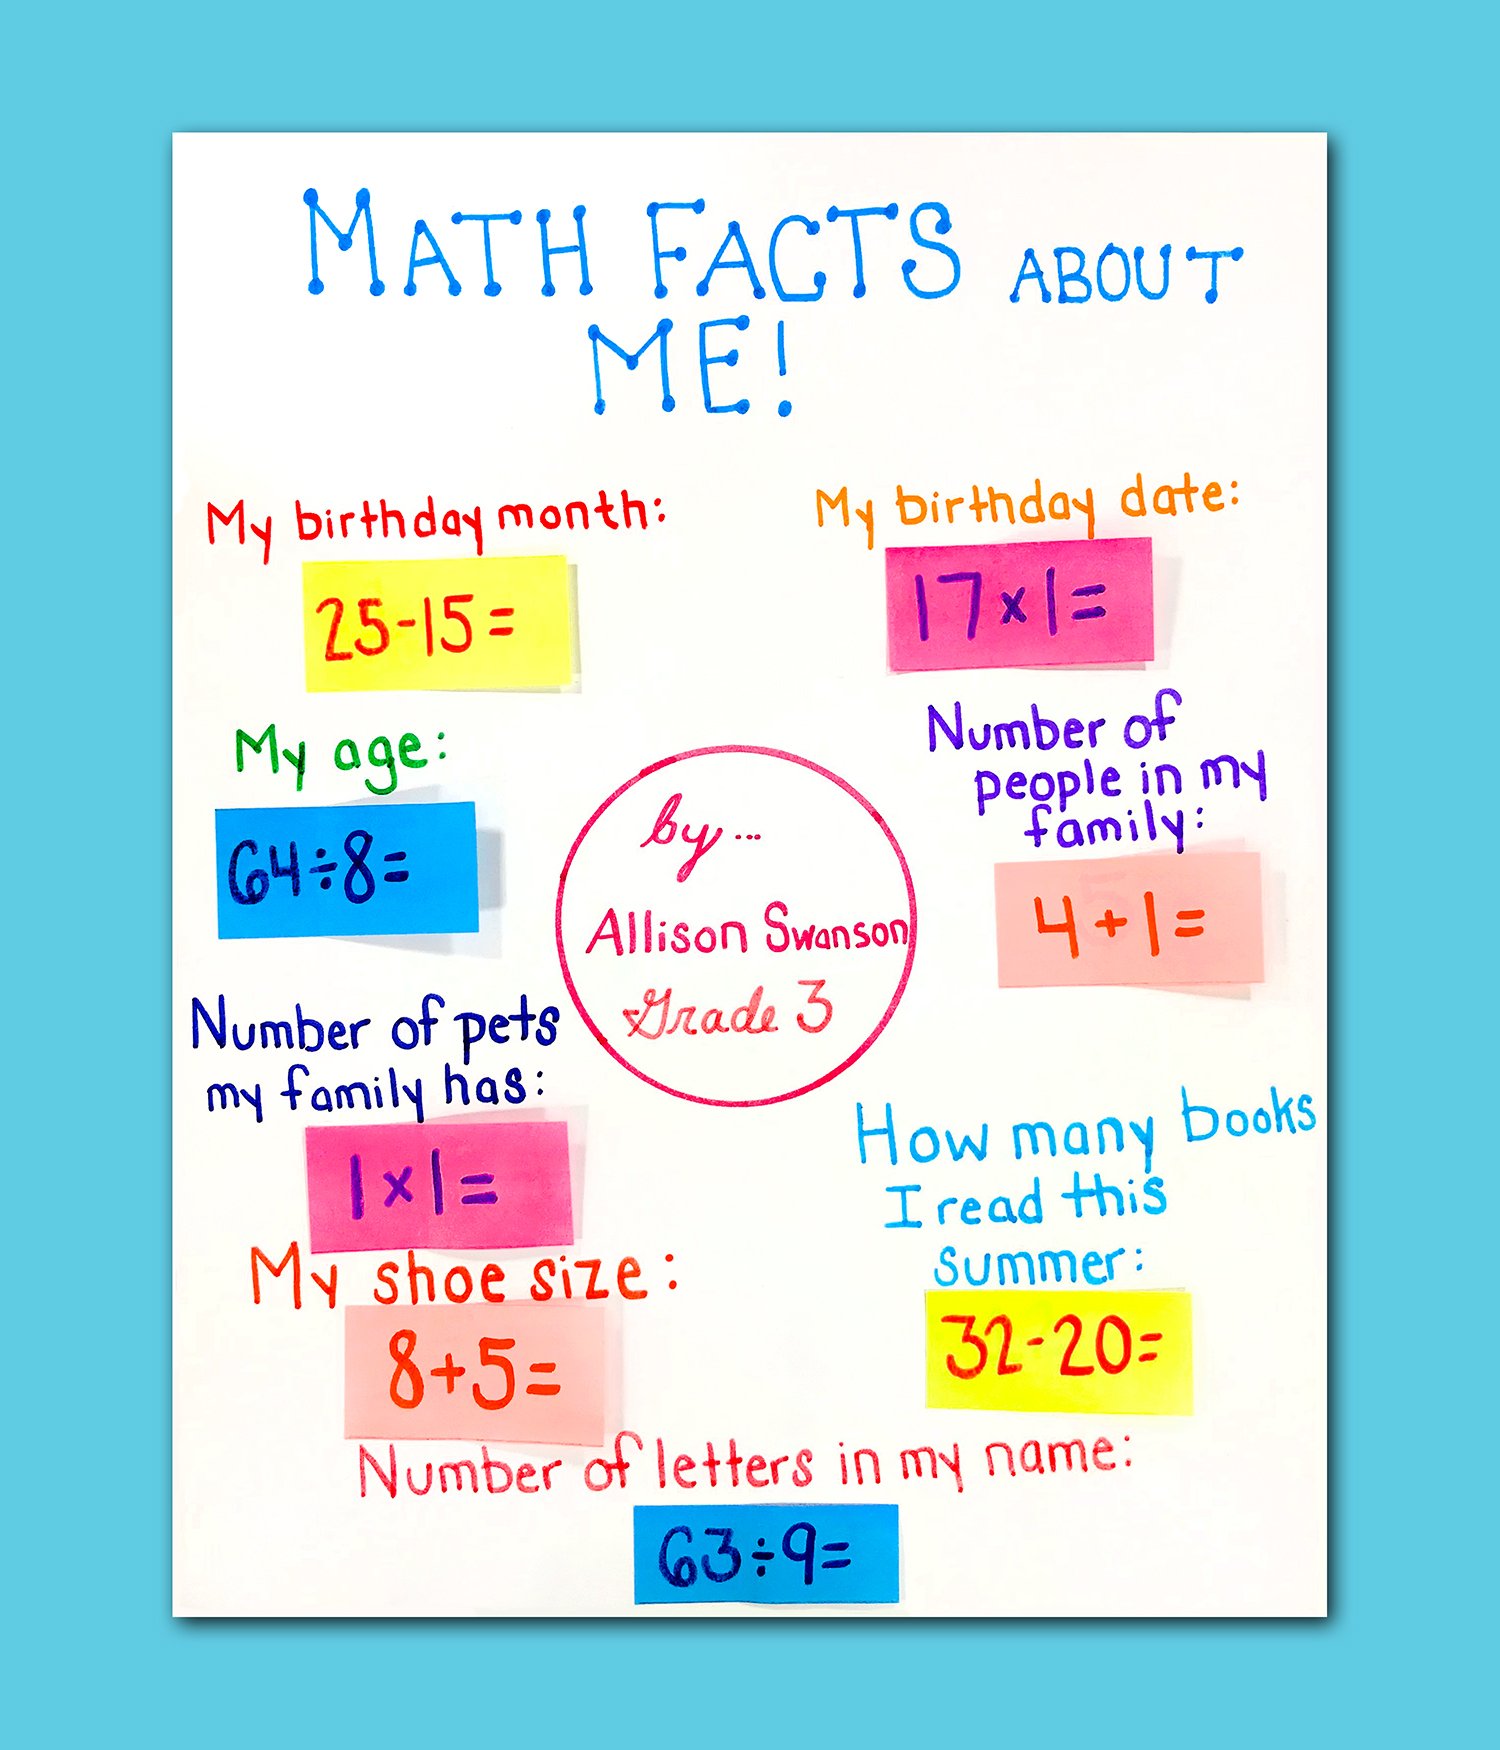 Detail Maths About Me Template Nomer 49